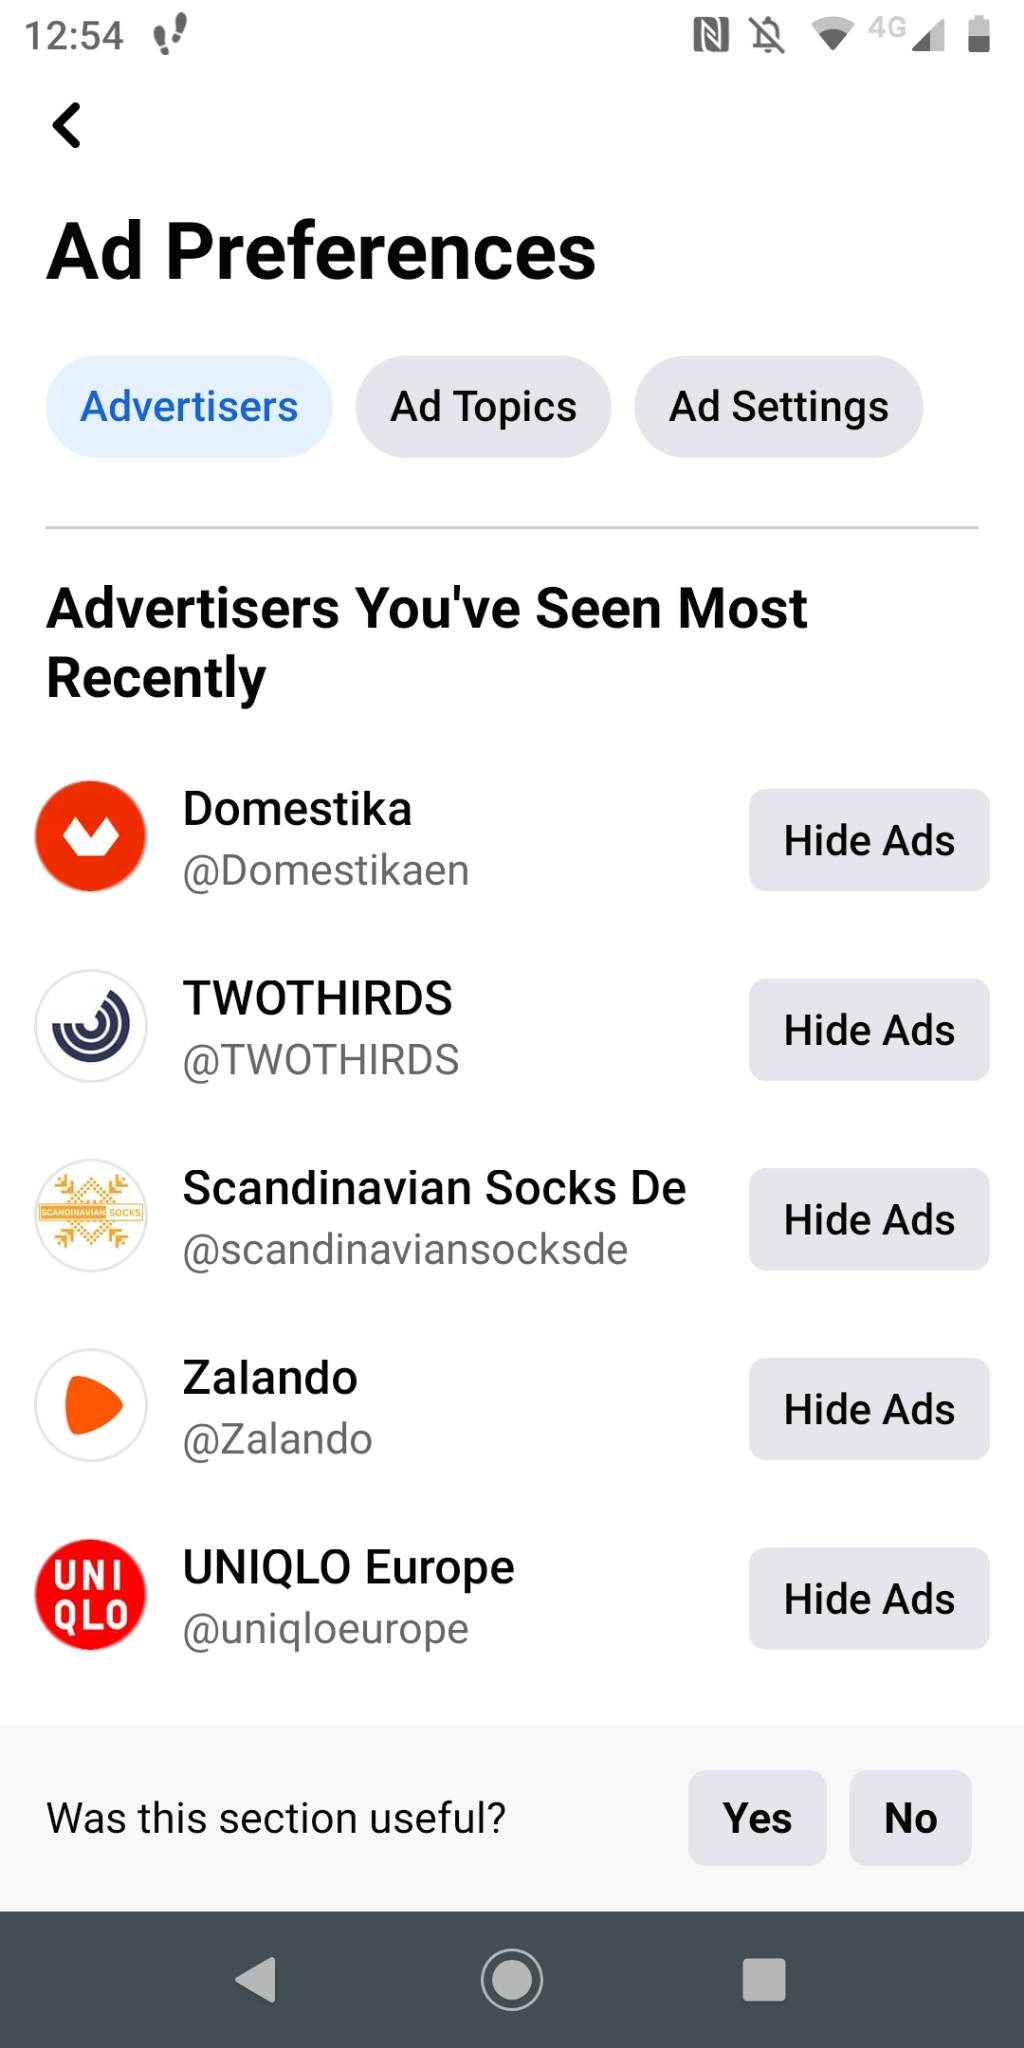 Ad preferences on Facebook home screen